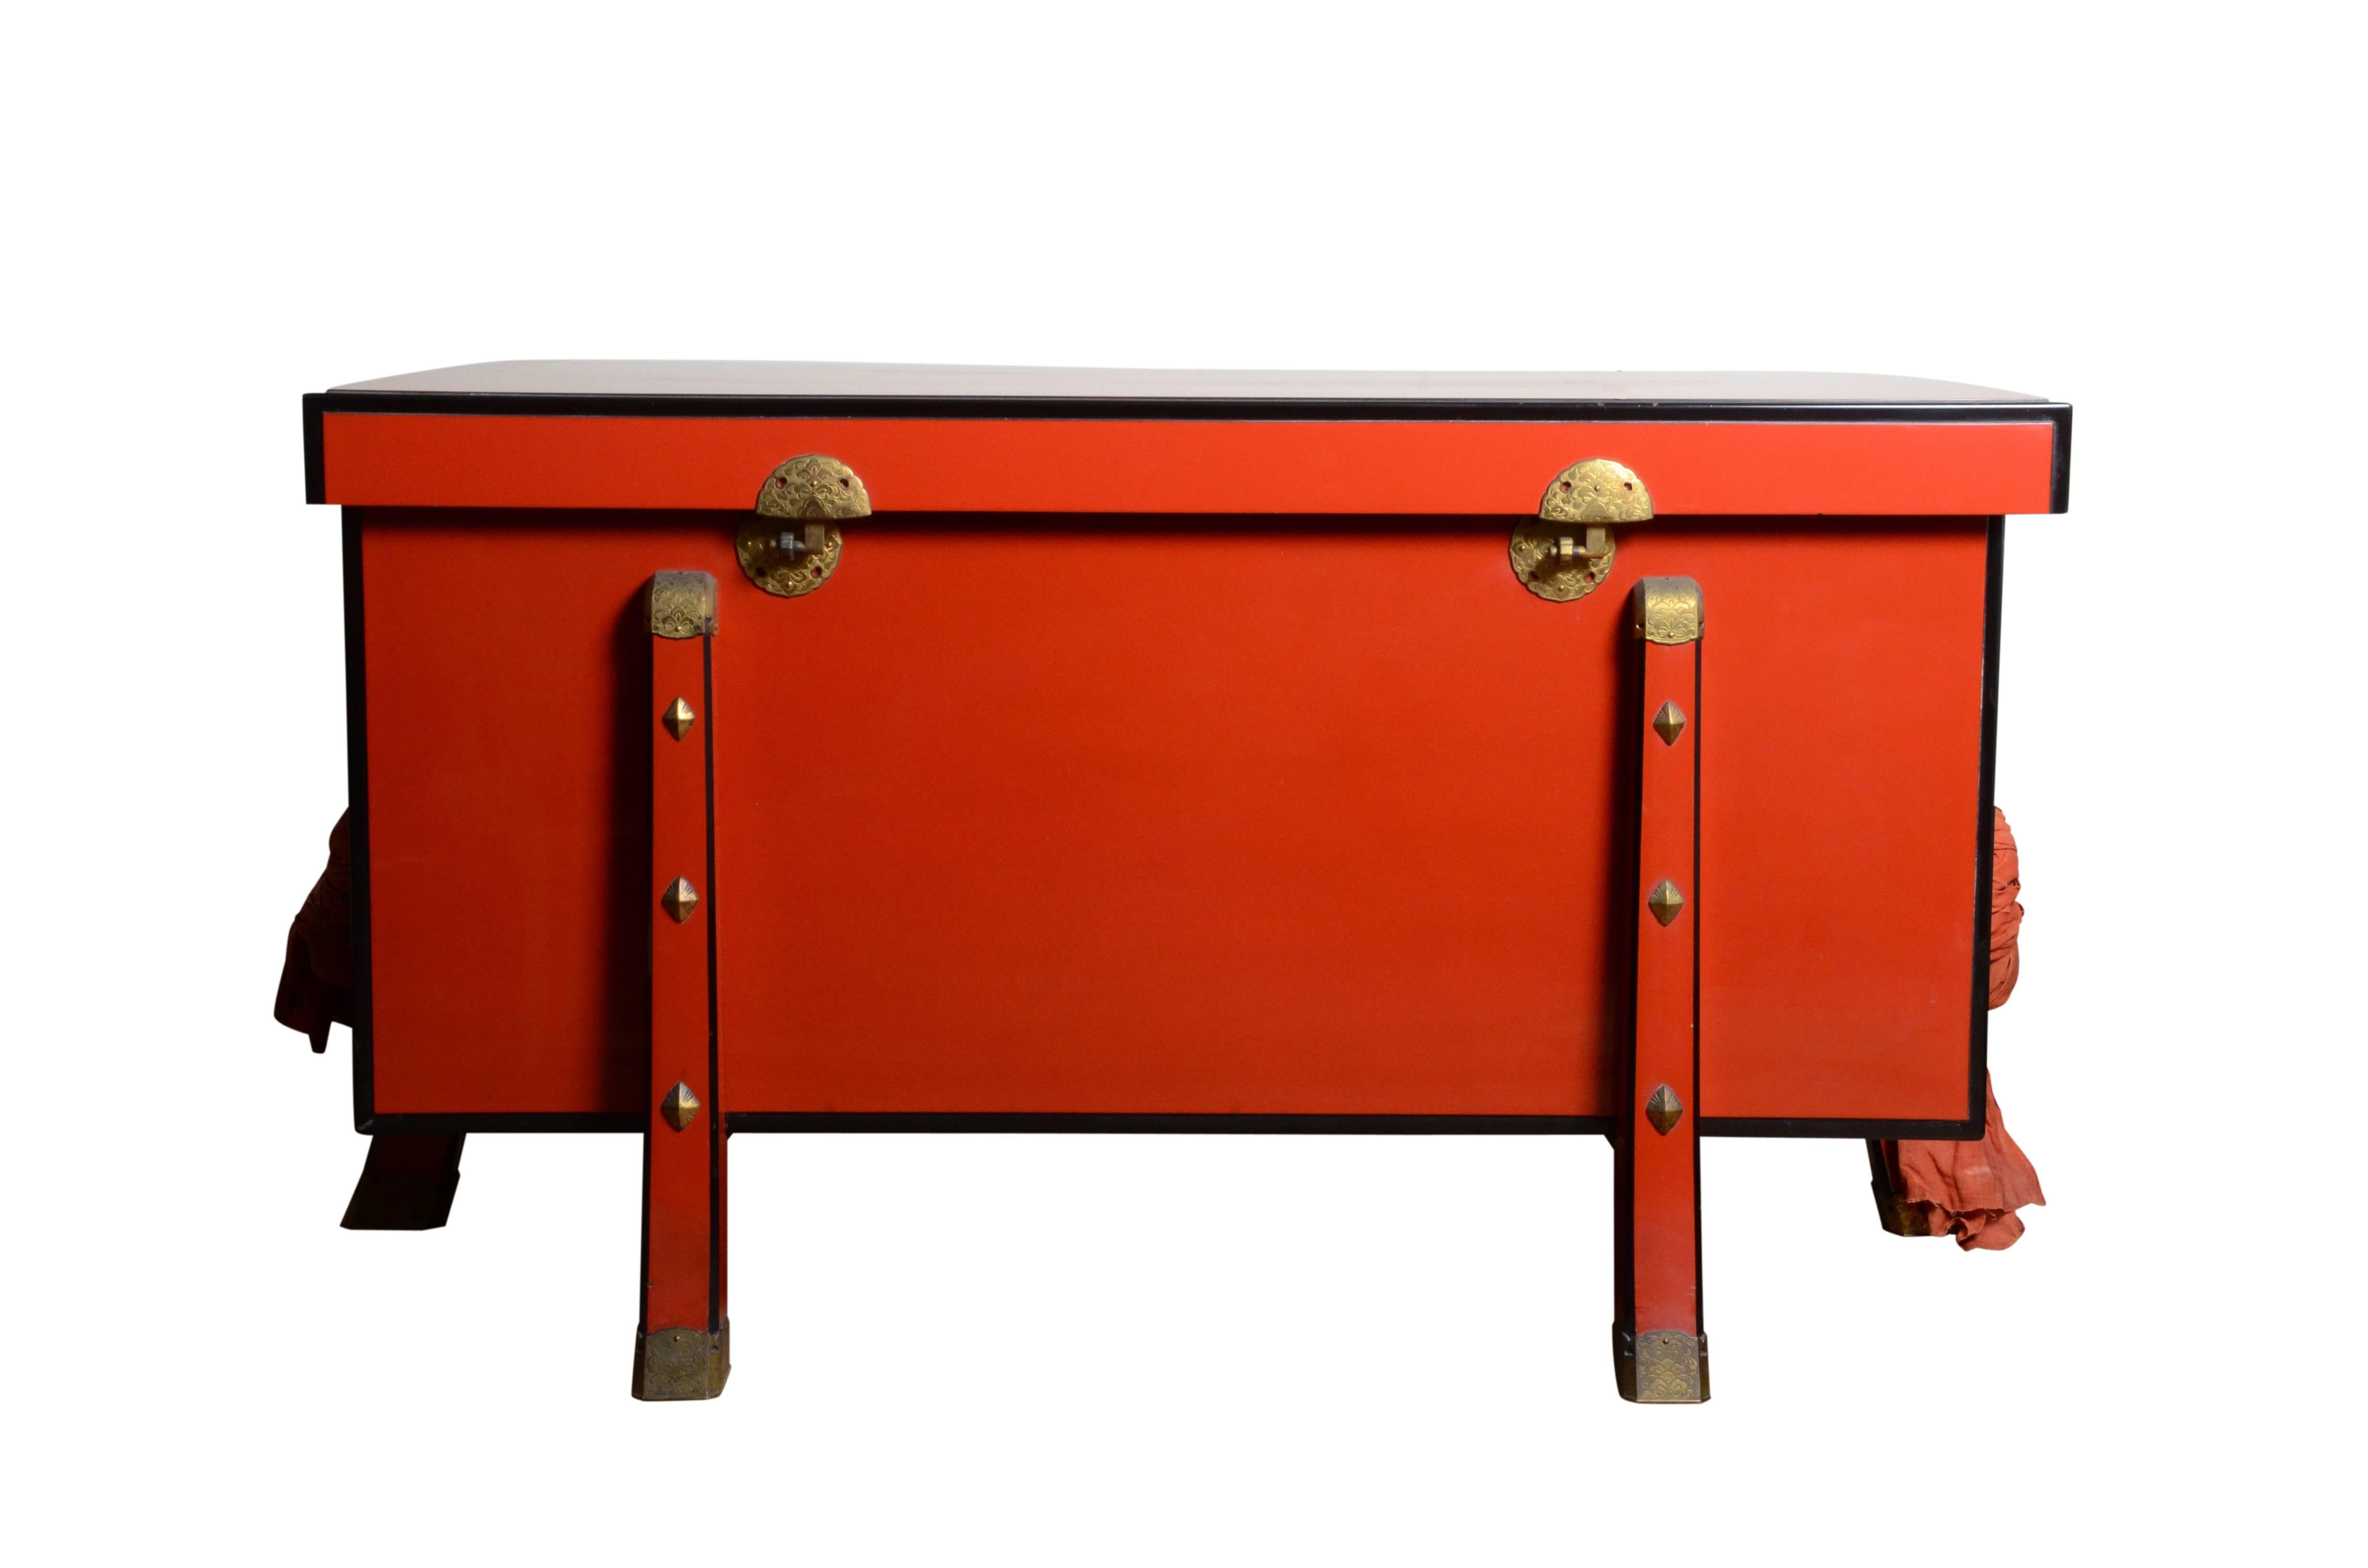 Rare Japanese vermilion red and black lacquered trunk, a copy of an example in the collection of the Shosoin Imperial treasure storehouse. Set on six splayed legs with elaborate chased and copper hardware. Meiji period, late 19th century.